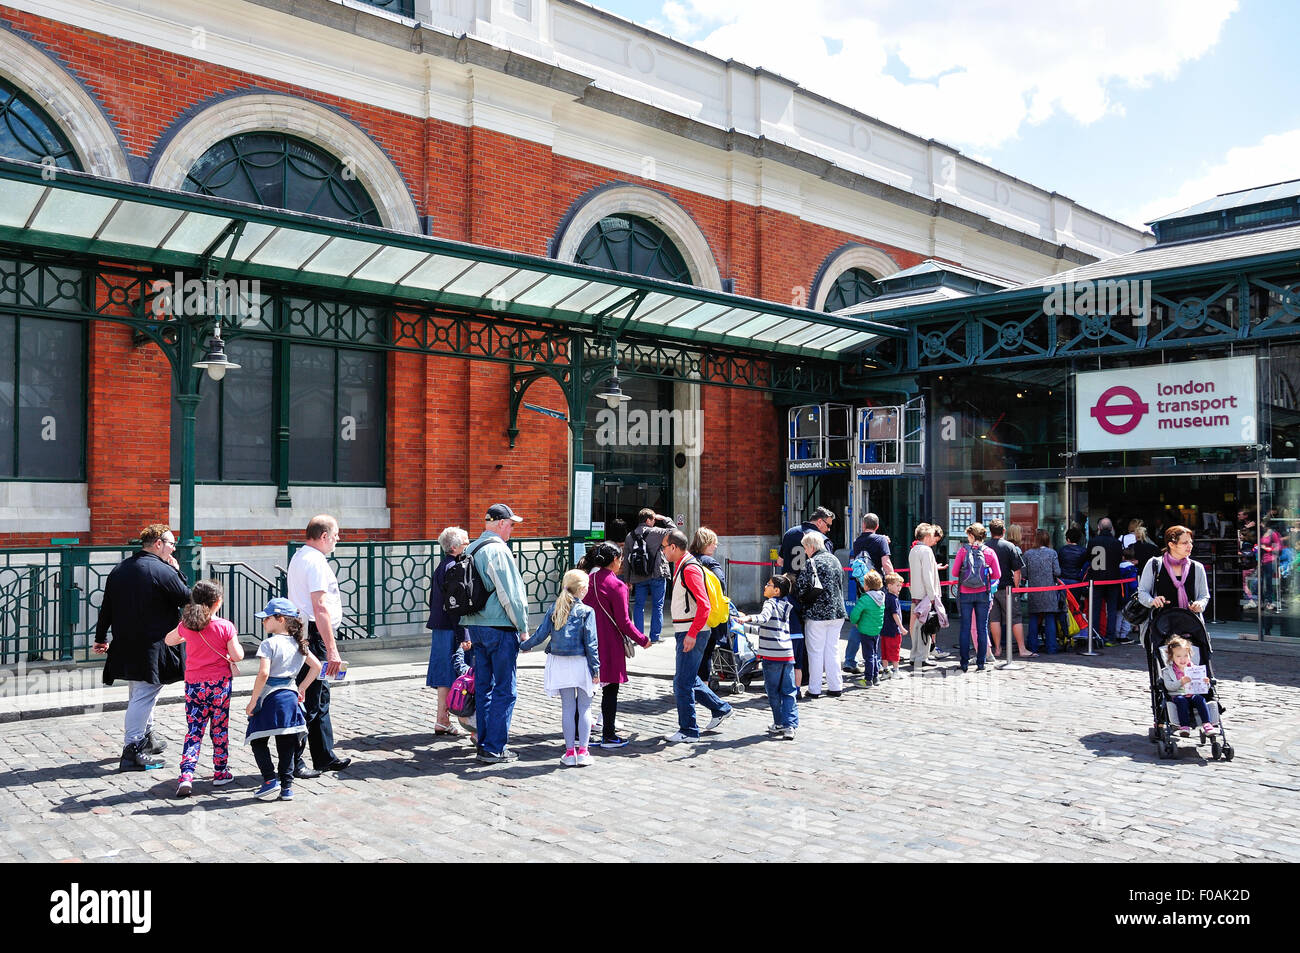 Queue at entrance to London Transport Museum, Covent Garden, City of Westminster, London, England, United Kingdom Stock Photo